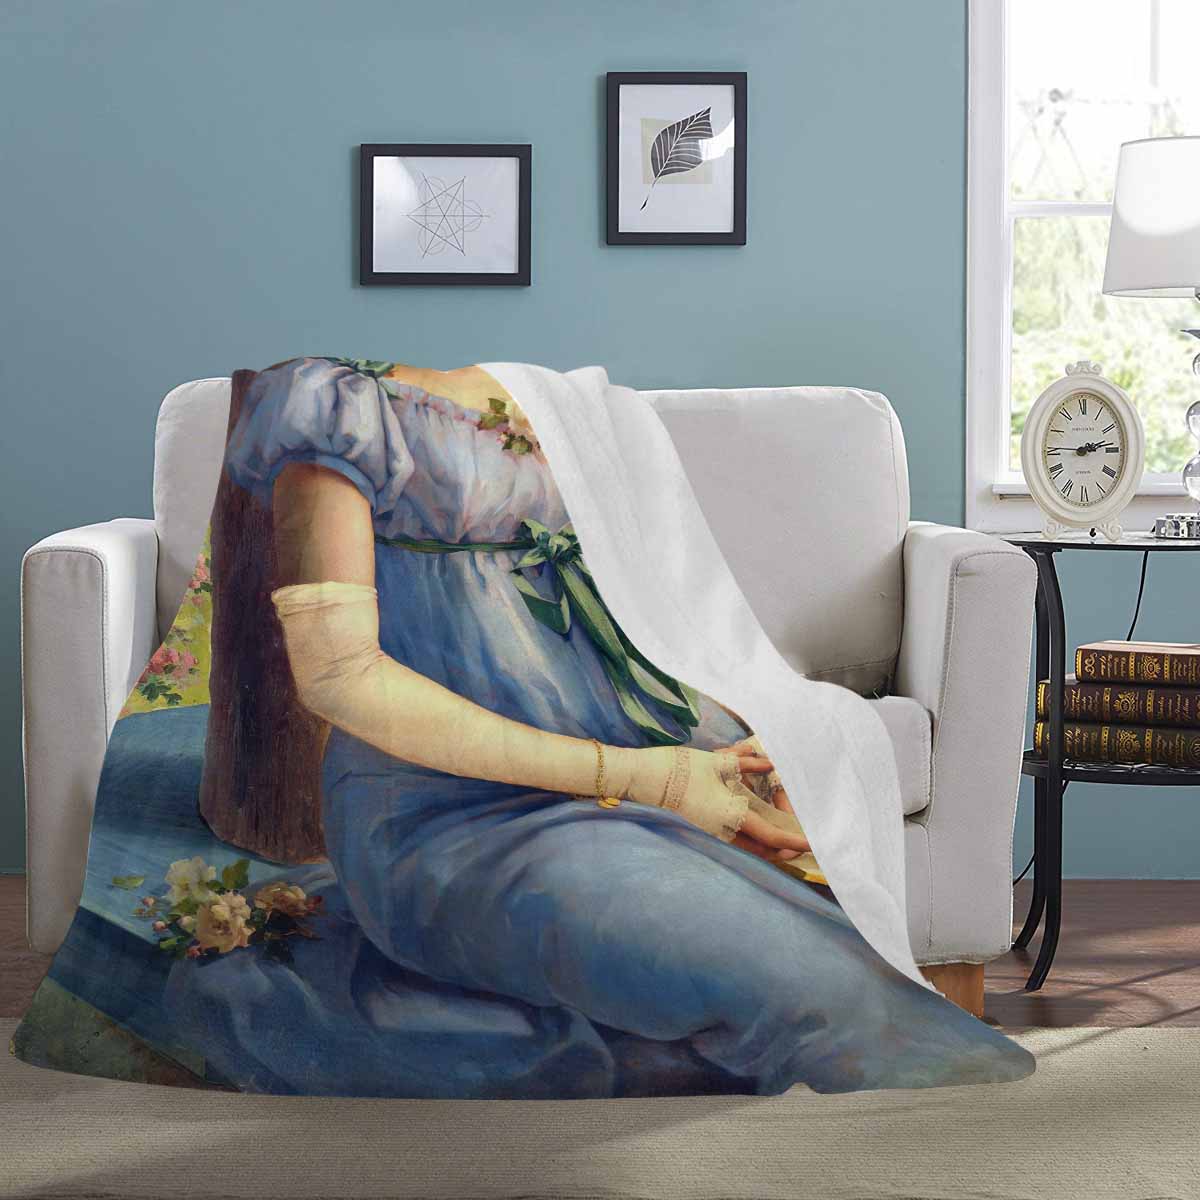 Victorian Lady Design BLANKET, LARGE 60 in x 80 in, A SWEET GLANCE